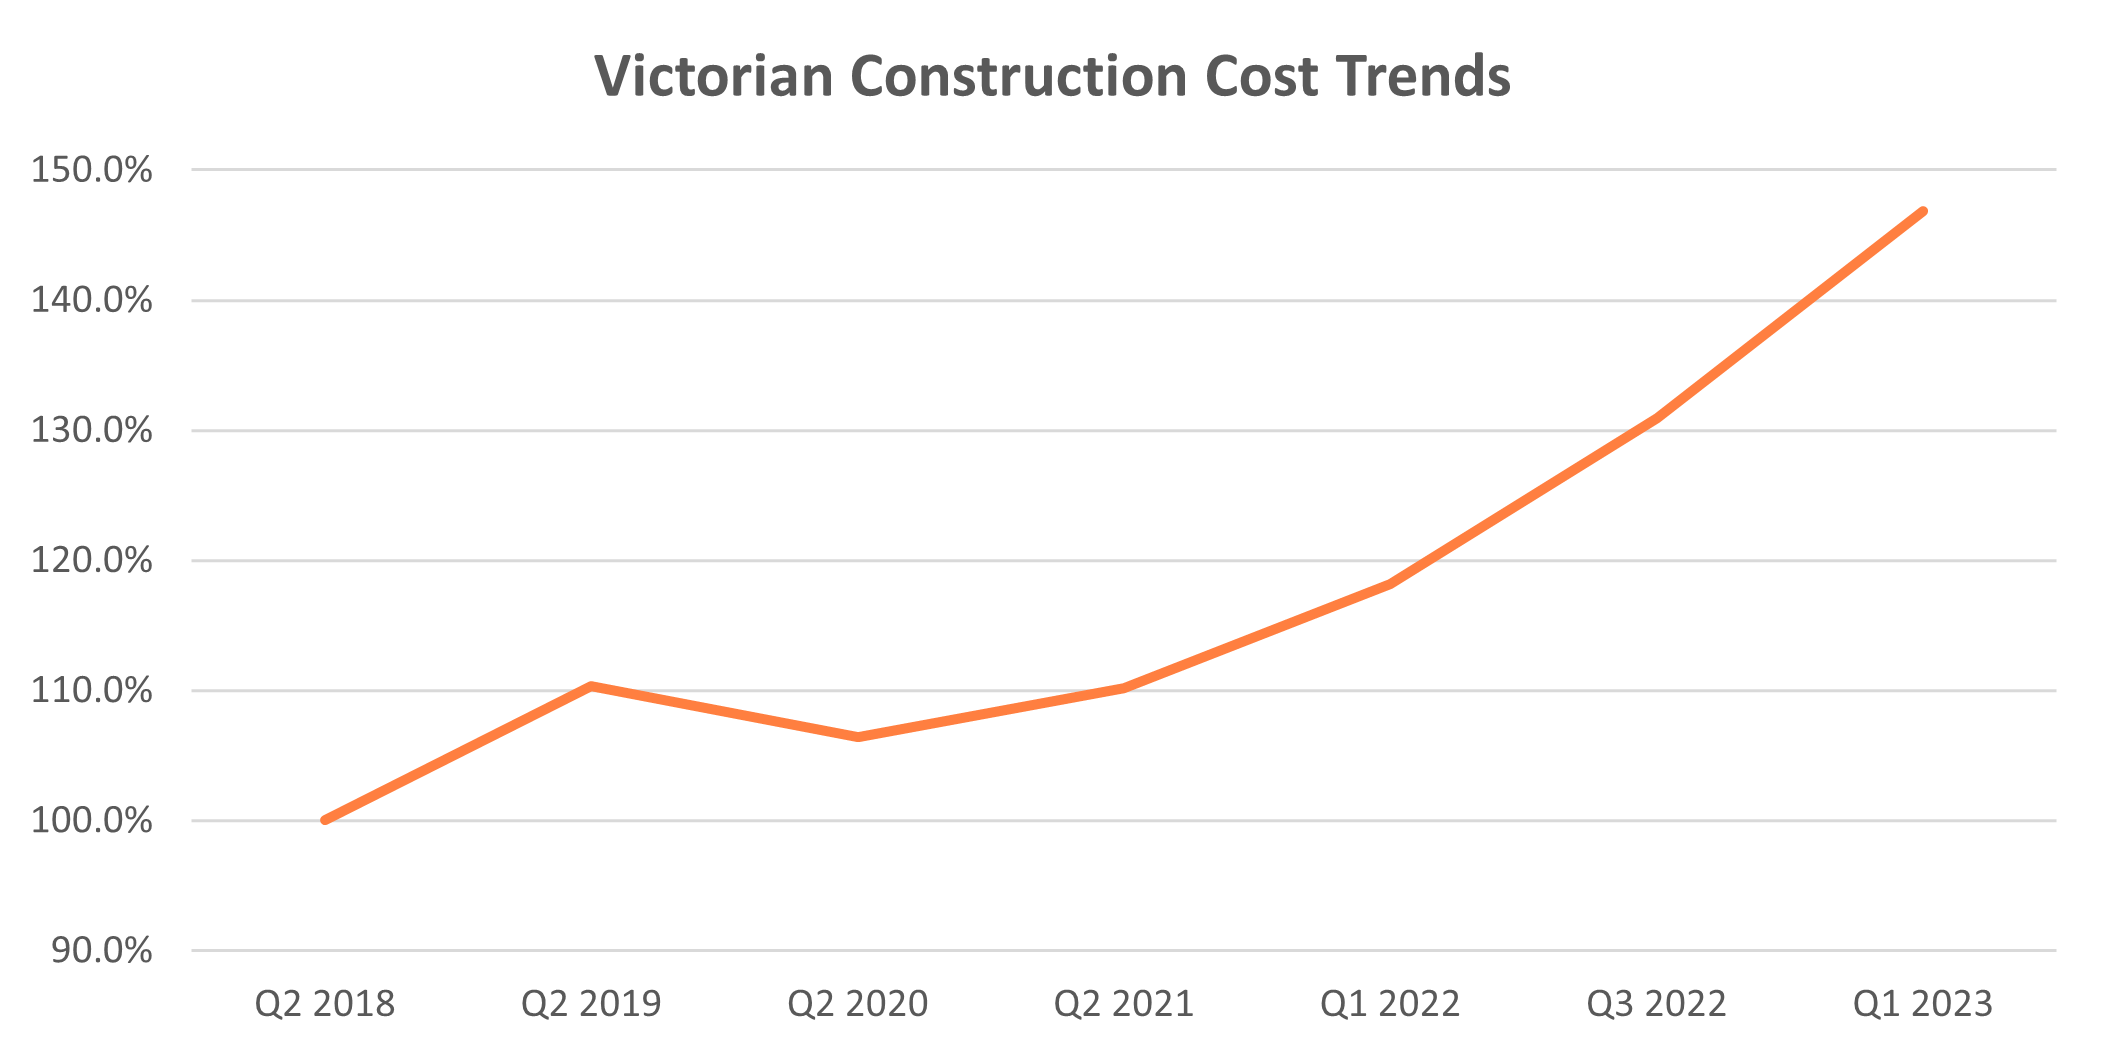 Victorian Construction Cost Trends